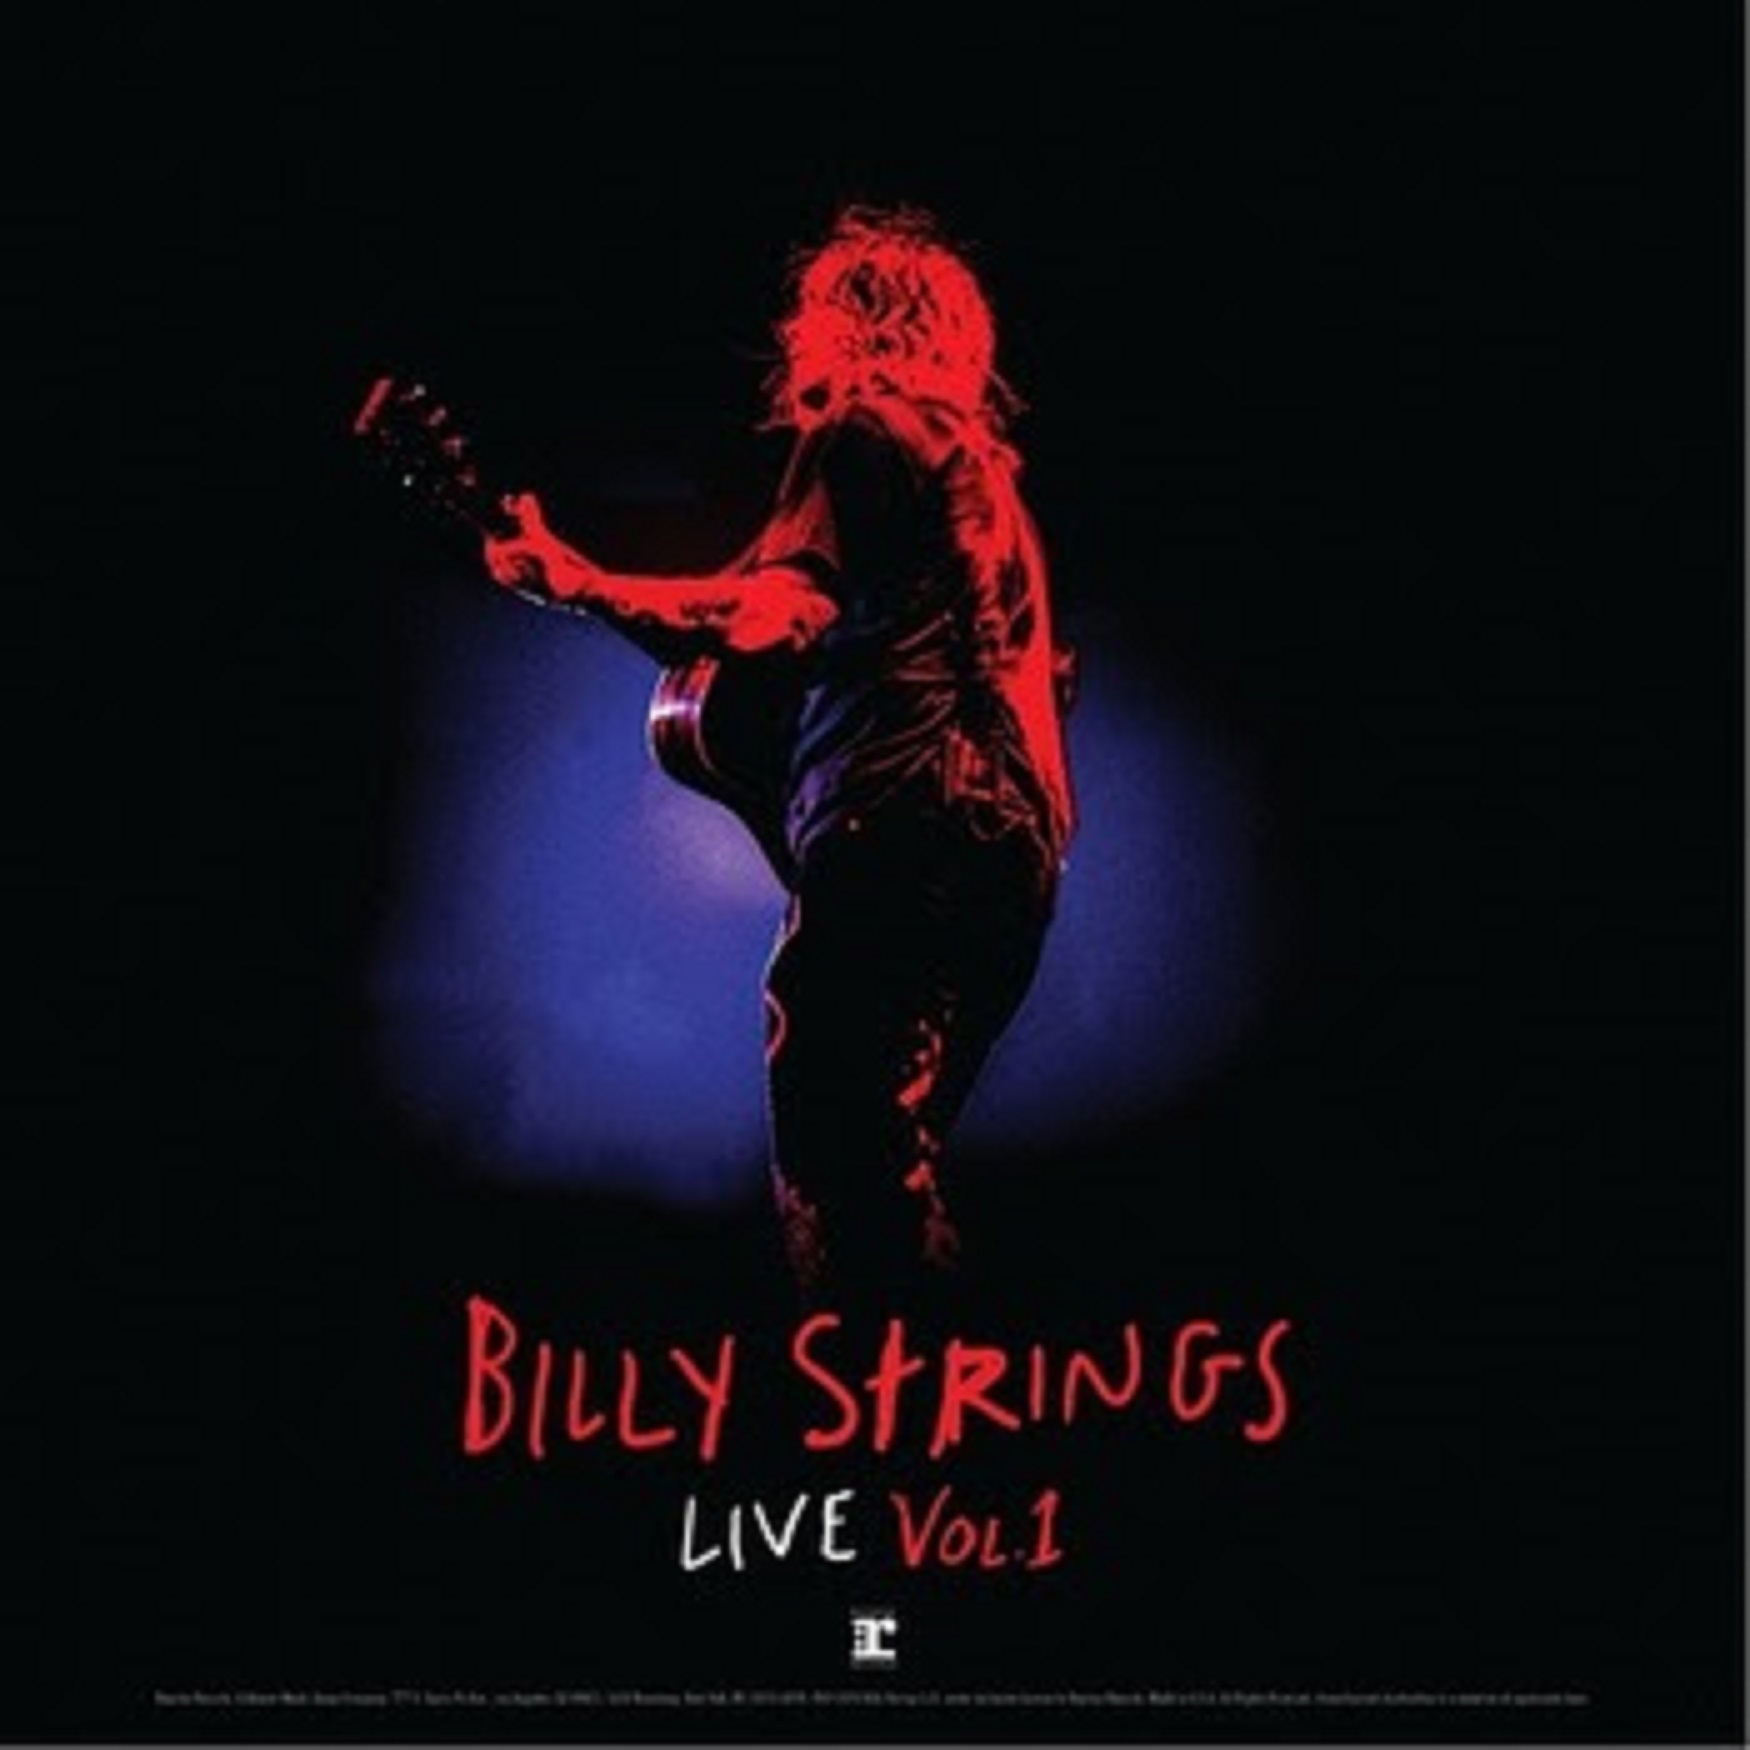 "Billy Strings Live Vol. 1" out today